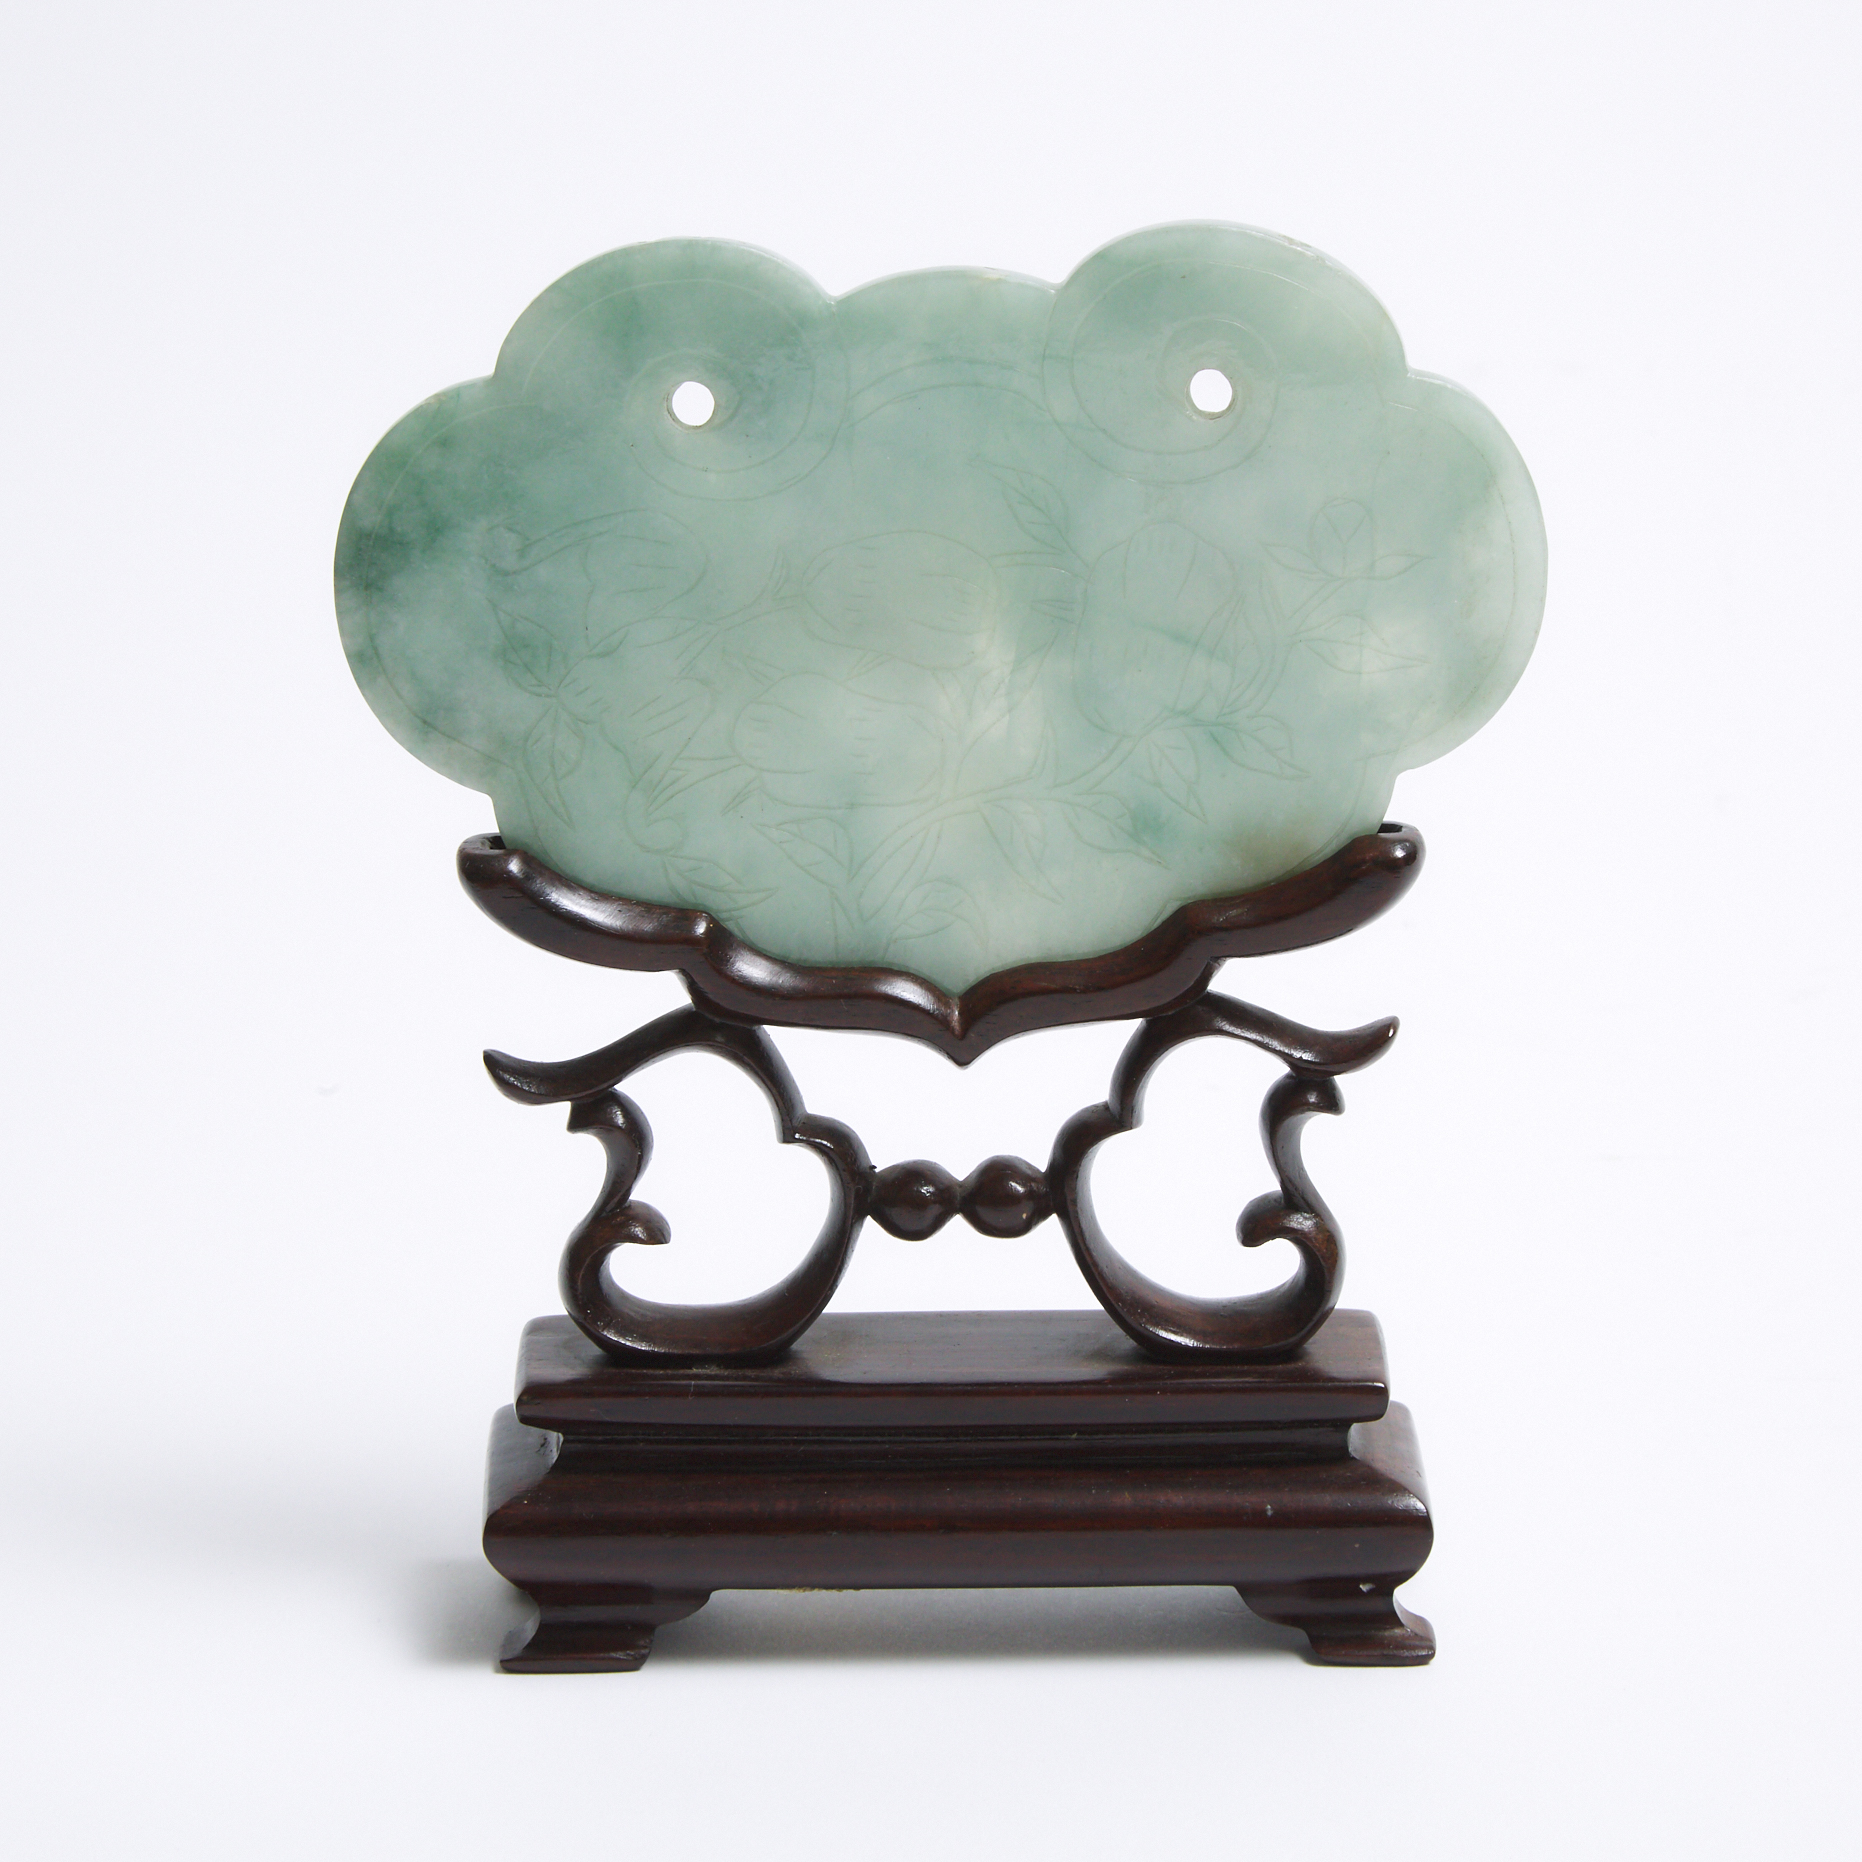 A Jadeite Ruyi Head Lock-Form Plaque with Stand, Qing Dynasty